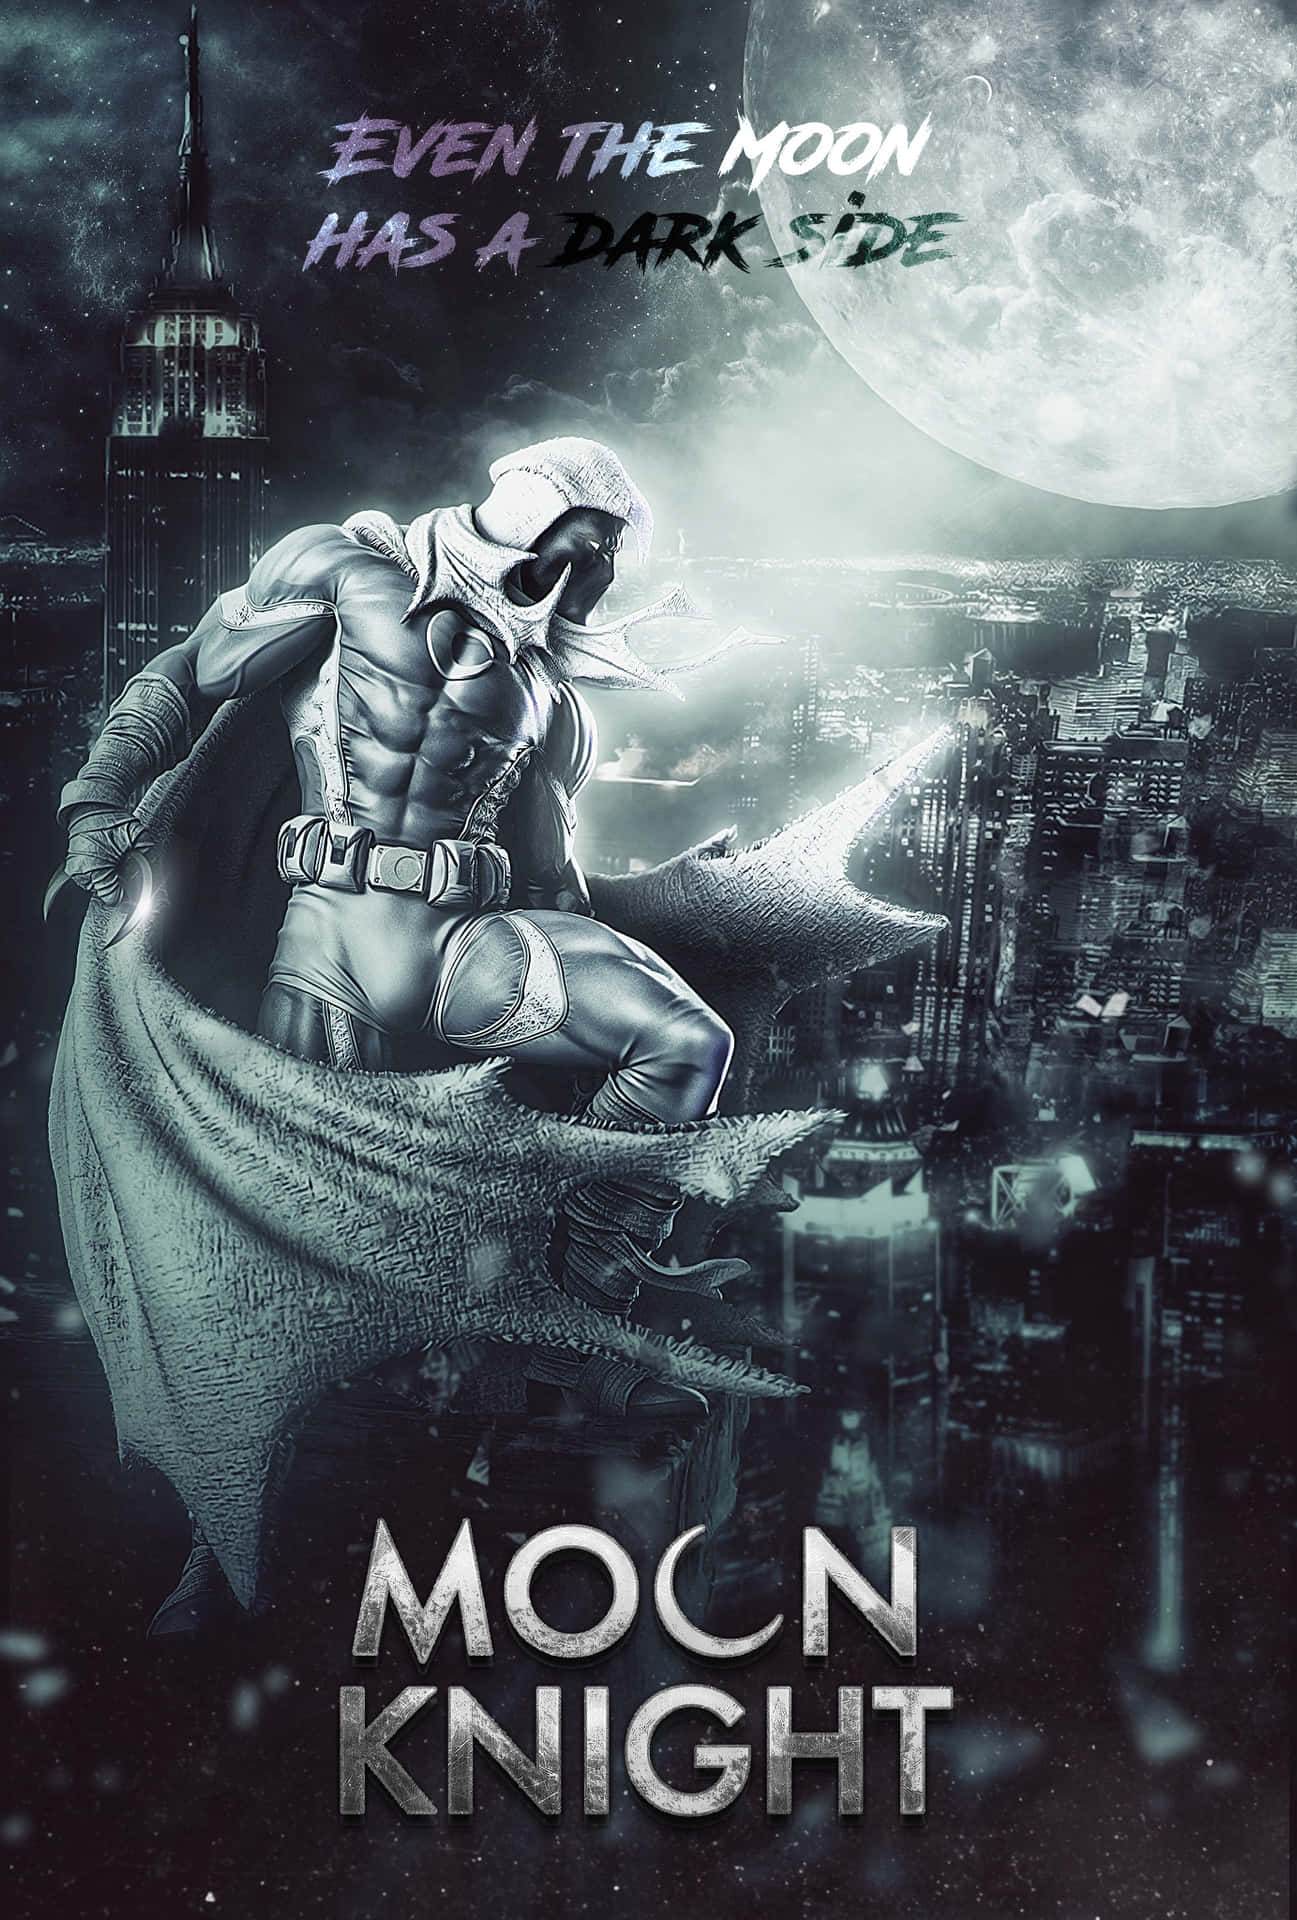 Moon Knight stands strong against the night sky.